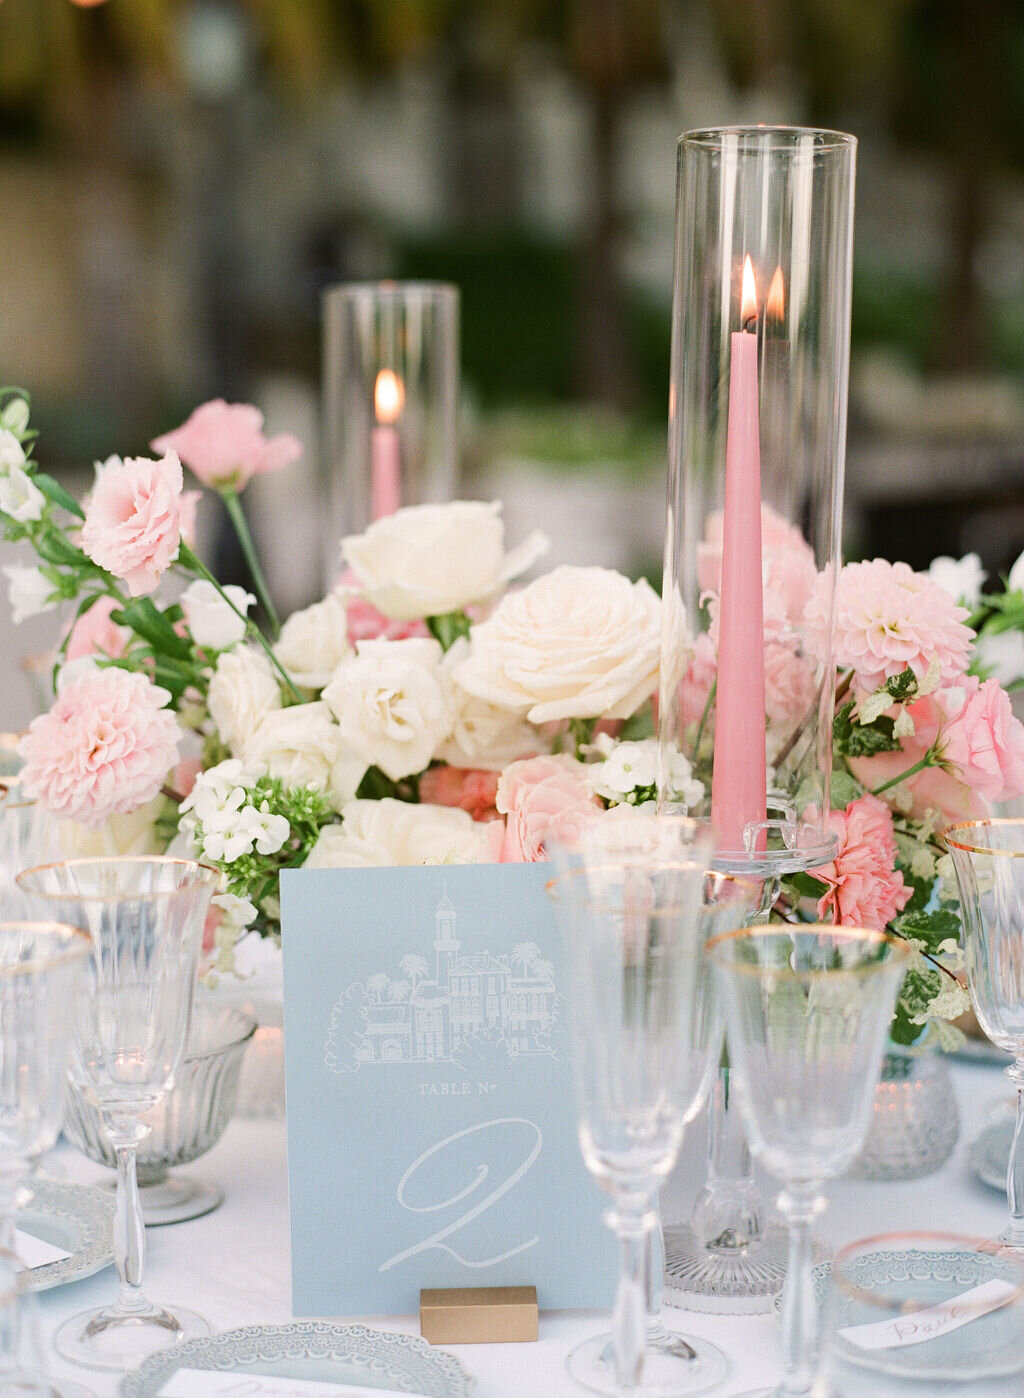 Jennifer Fox Weddings English speaking wedding planning & design agency in France crafting refined and bespoke weddings and celebrations Provence, Paris and destination Alyssa-Aaron-Wedding-Molly-Carr-Photography-Dinner-24